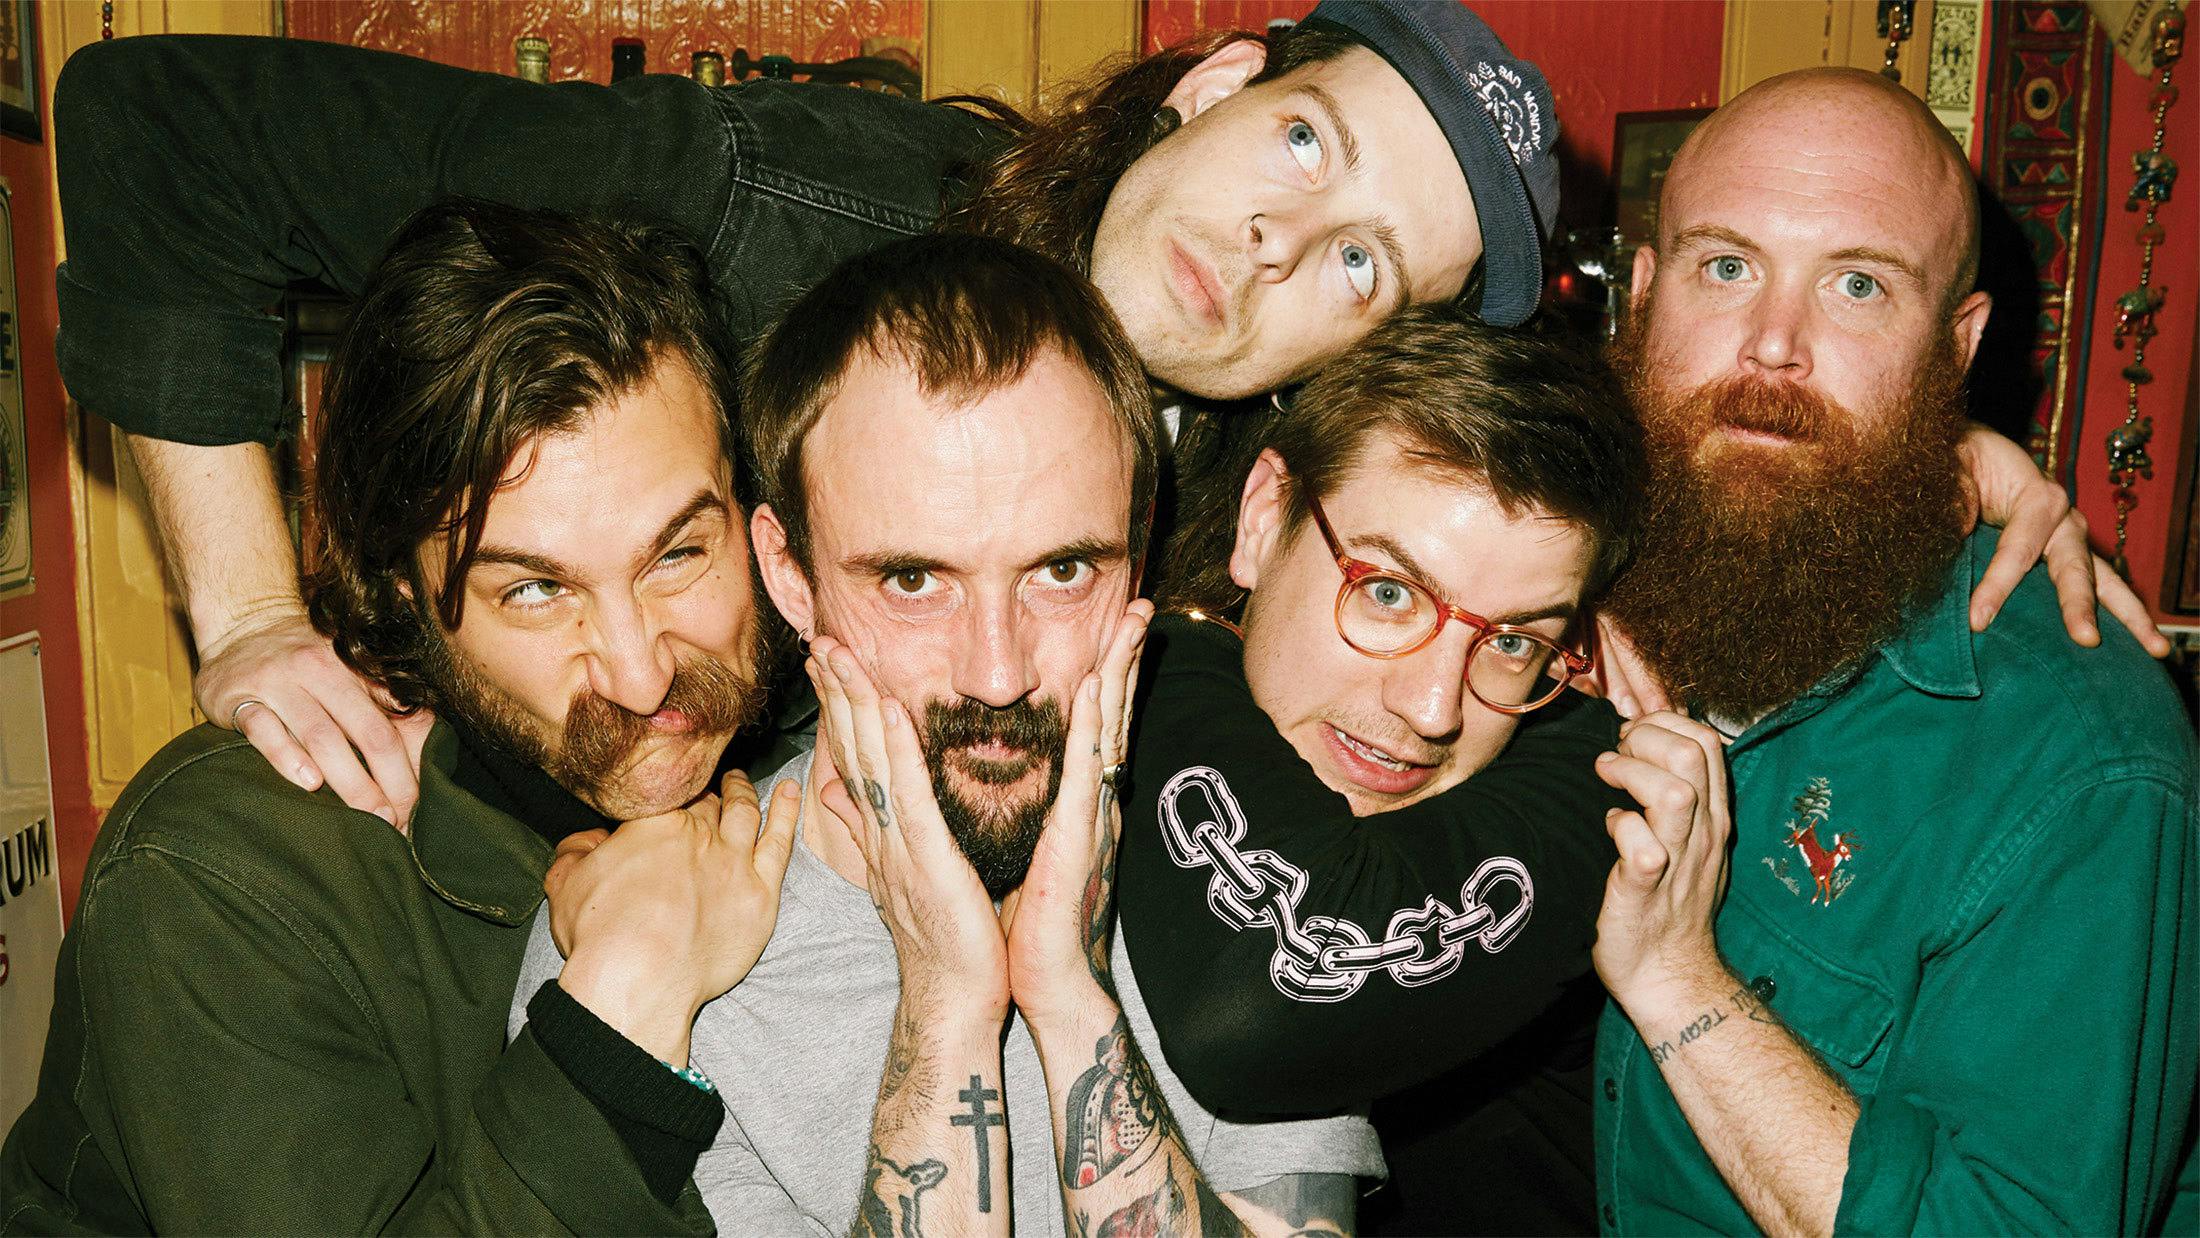 Strength In Unity: Why IDLES Will Never Give Up The Fight